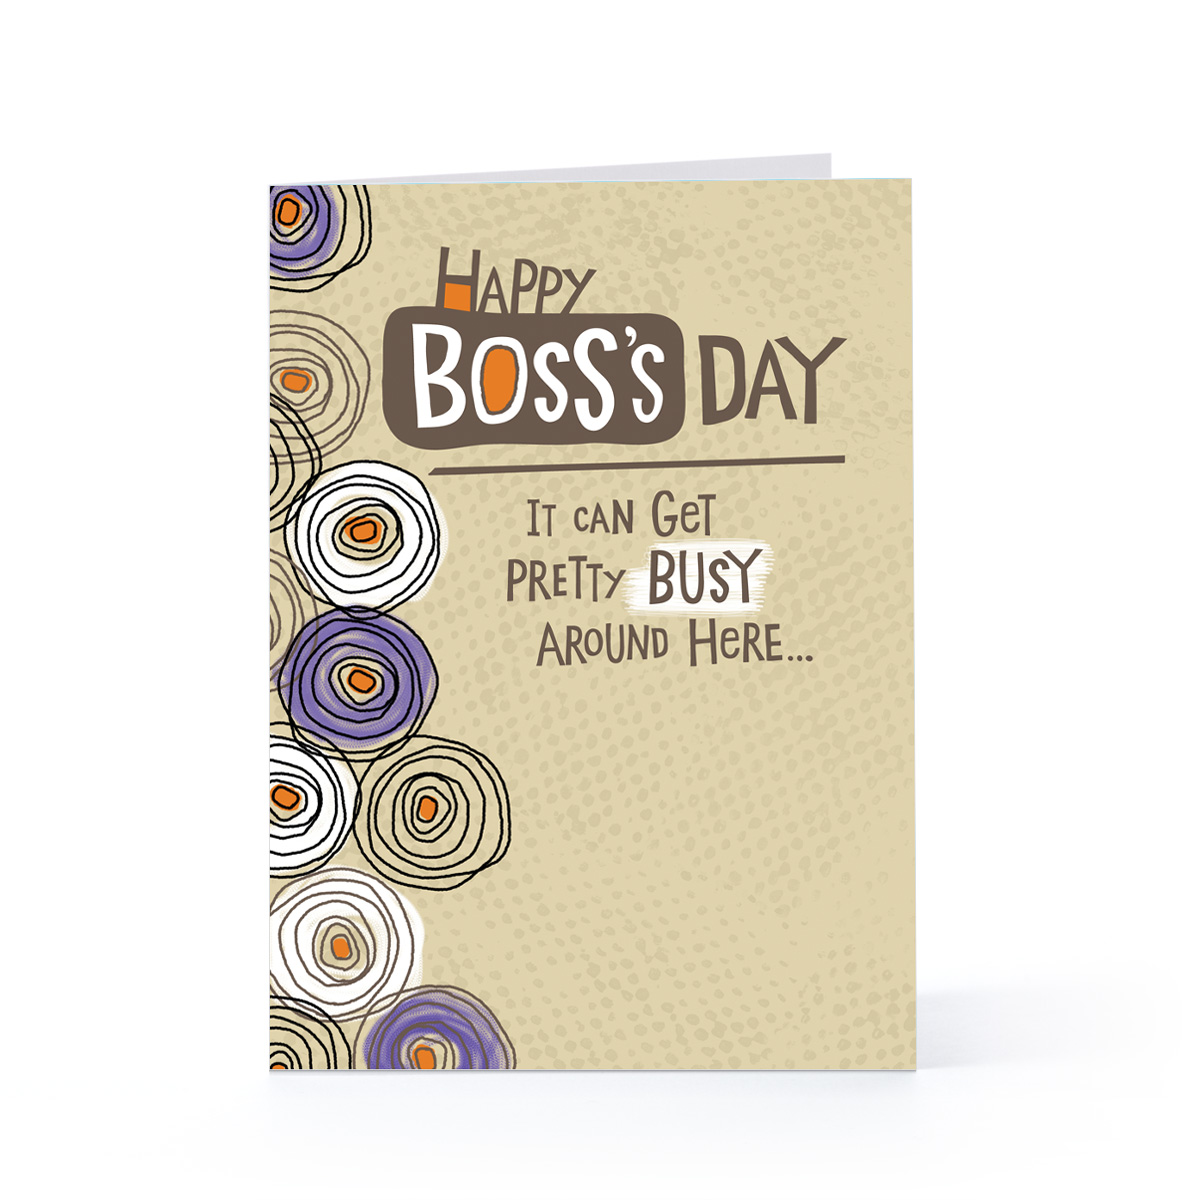 National Boss Day Quotes Quotesgram